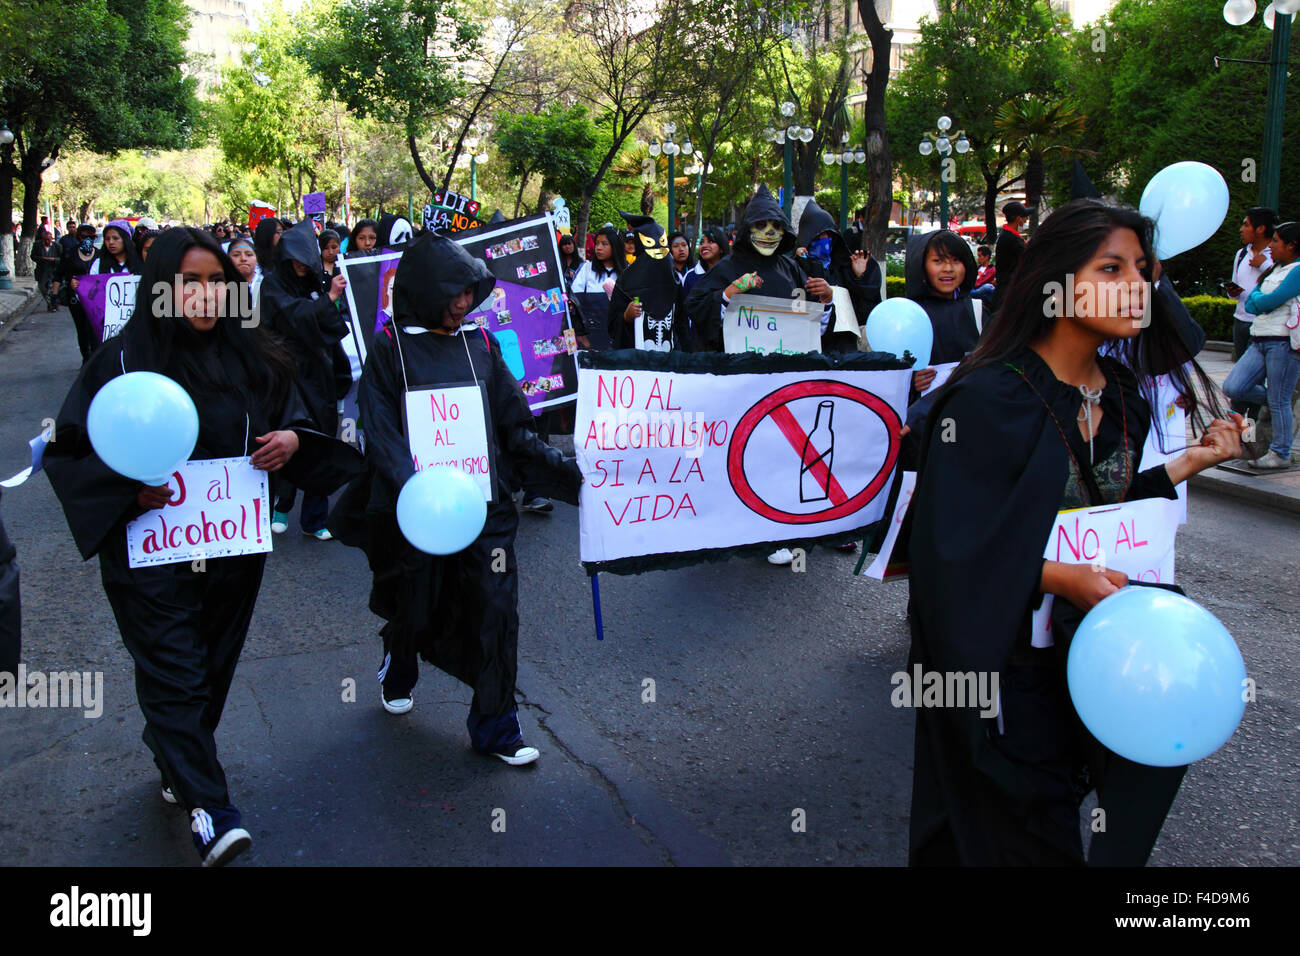 La Paz, Bolivia, 16th October 2015. Female students dressed in black carry placards saying 'No to Alcoholism' during a march through La Paz city centre warning of the dangers of drug use. The demonstration is organised every year by the police together with schools and colleges to educate and raise awareness about drugs and their dangers. Credit: James Brunker / Alamy Live News Stock Photo